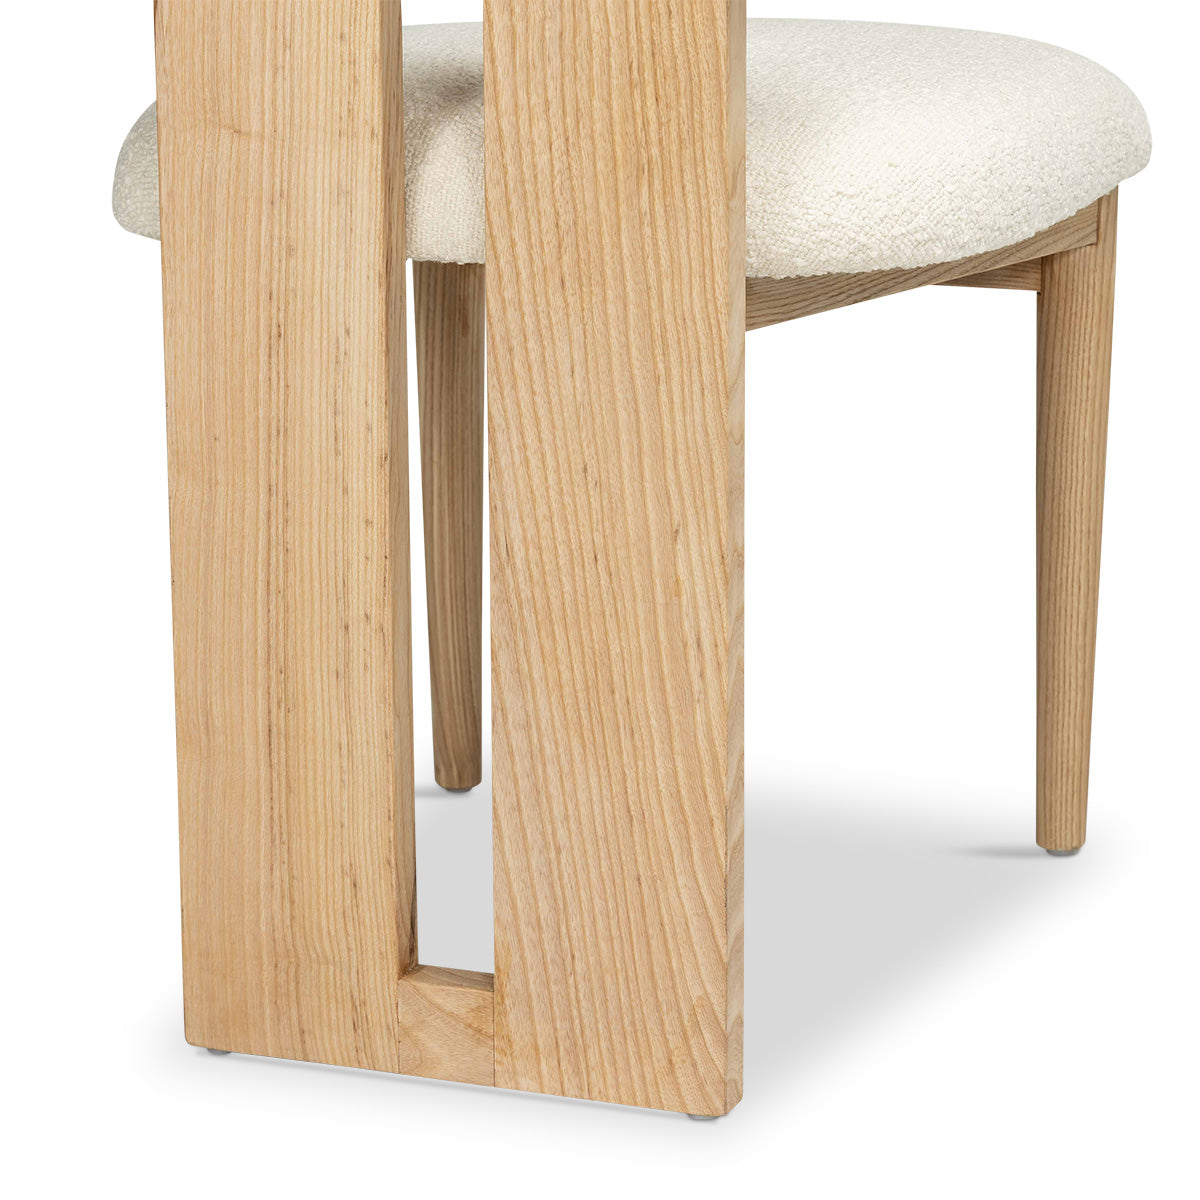 Shelter Island Dining Chair